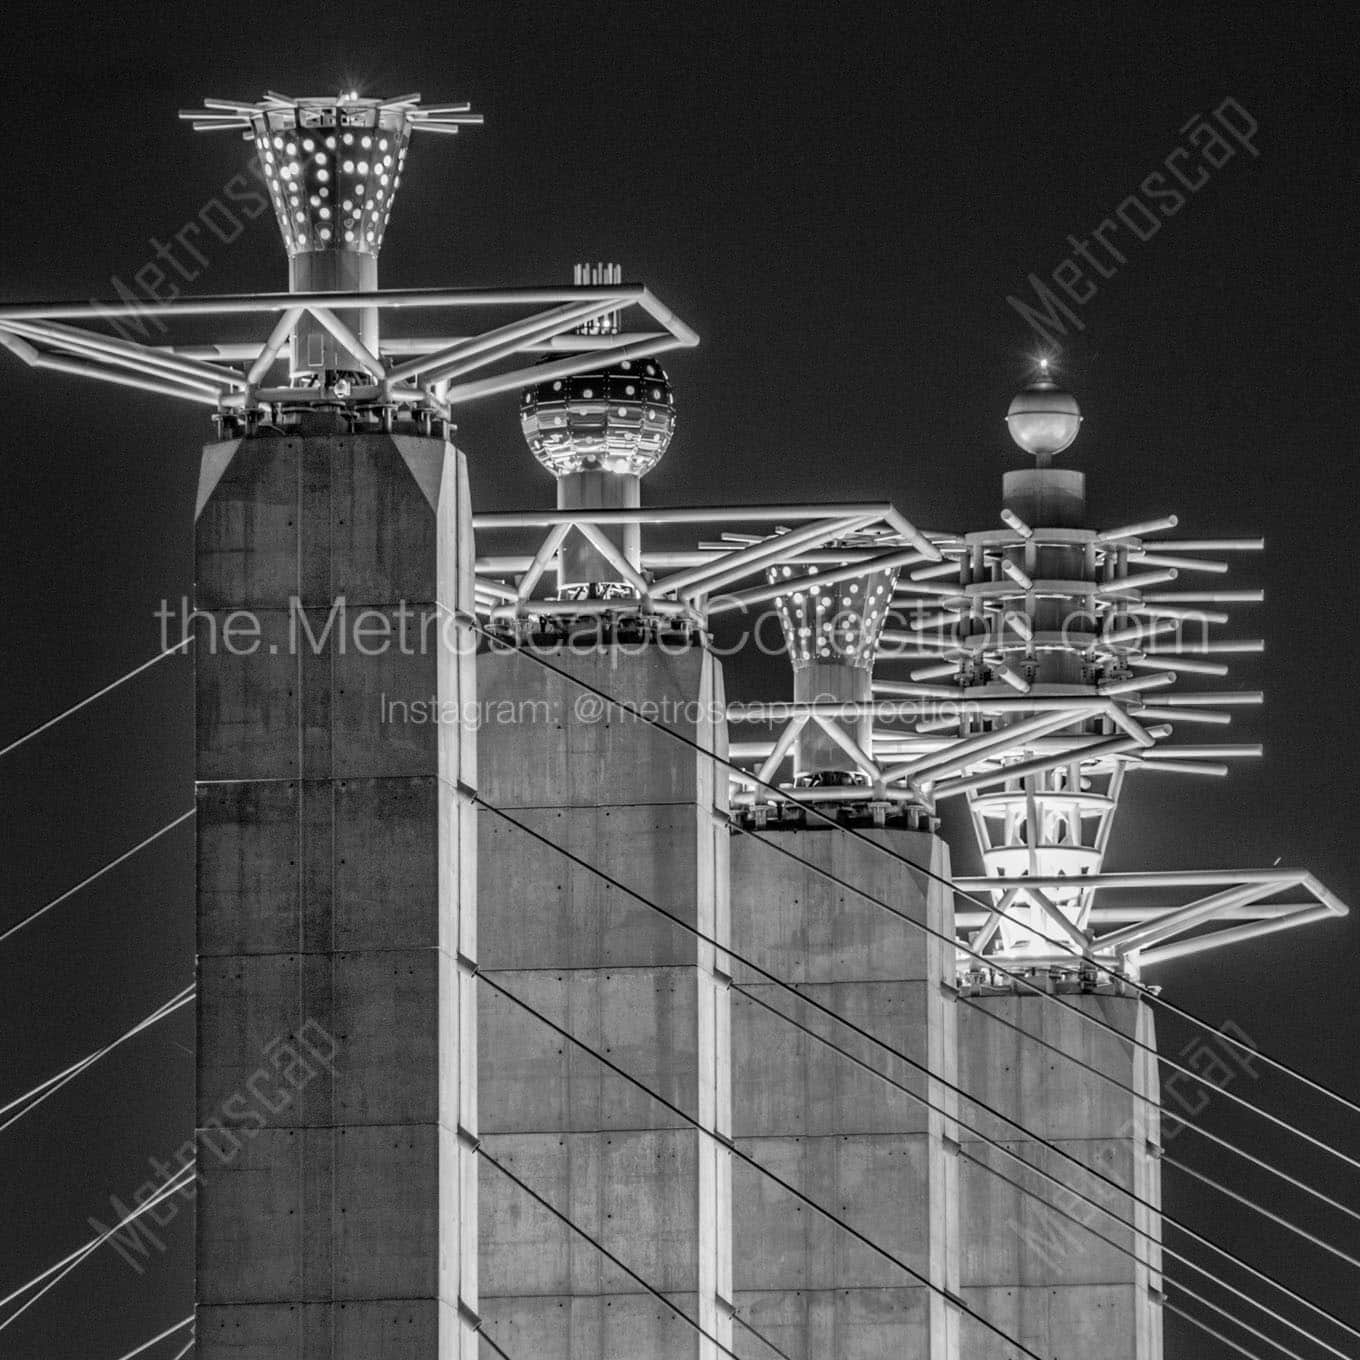 bartle hall pylons kc convention center Black & White Wall Art